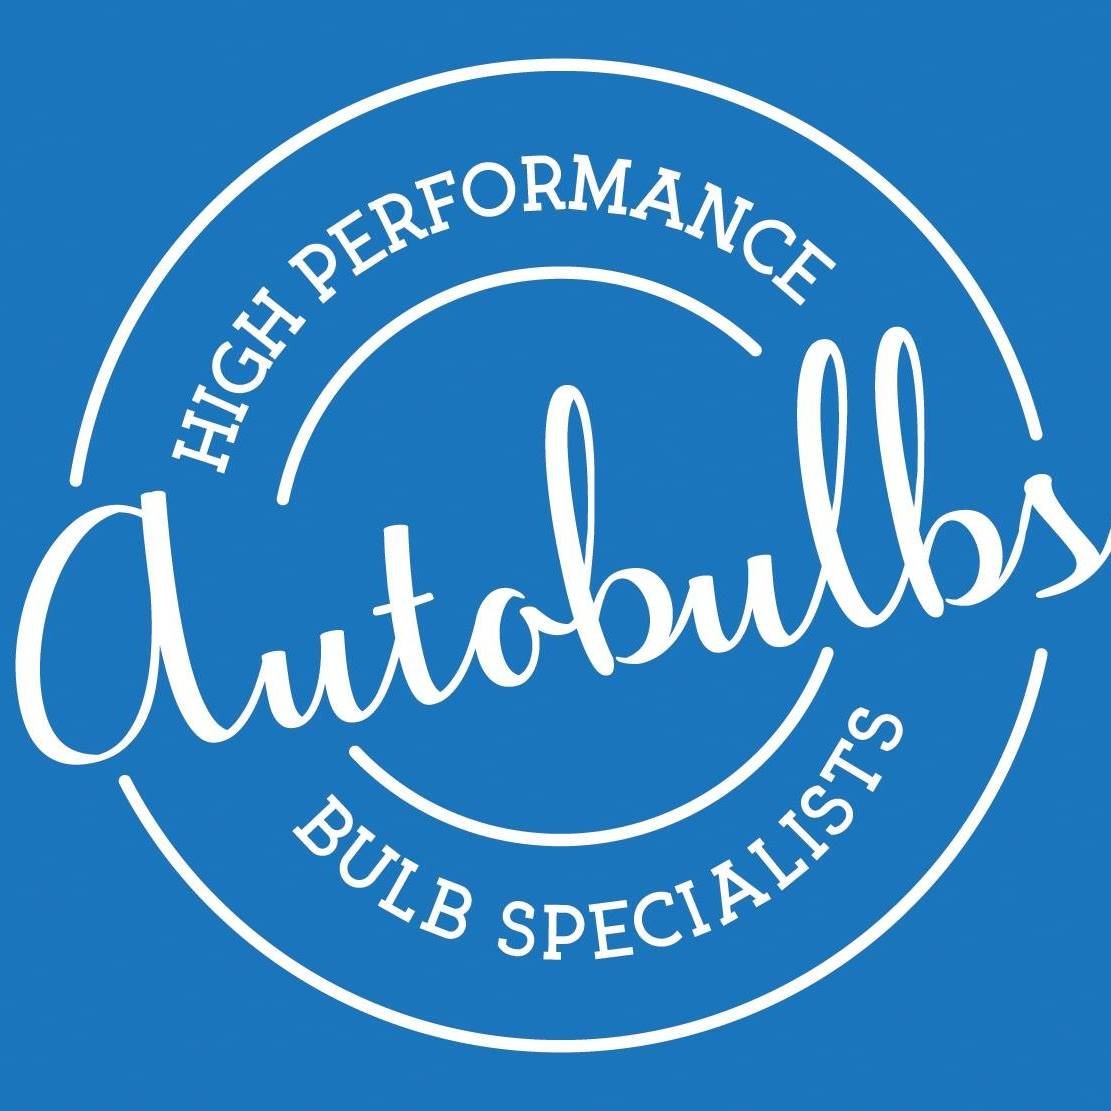 Autobulbs is a preferred distributor of Philips Automotive Lighting and Automotive accessories.